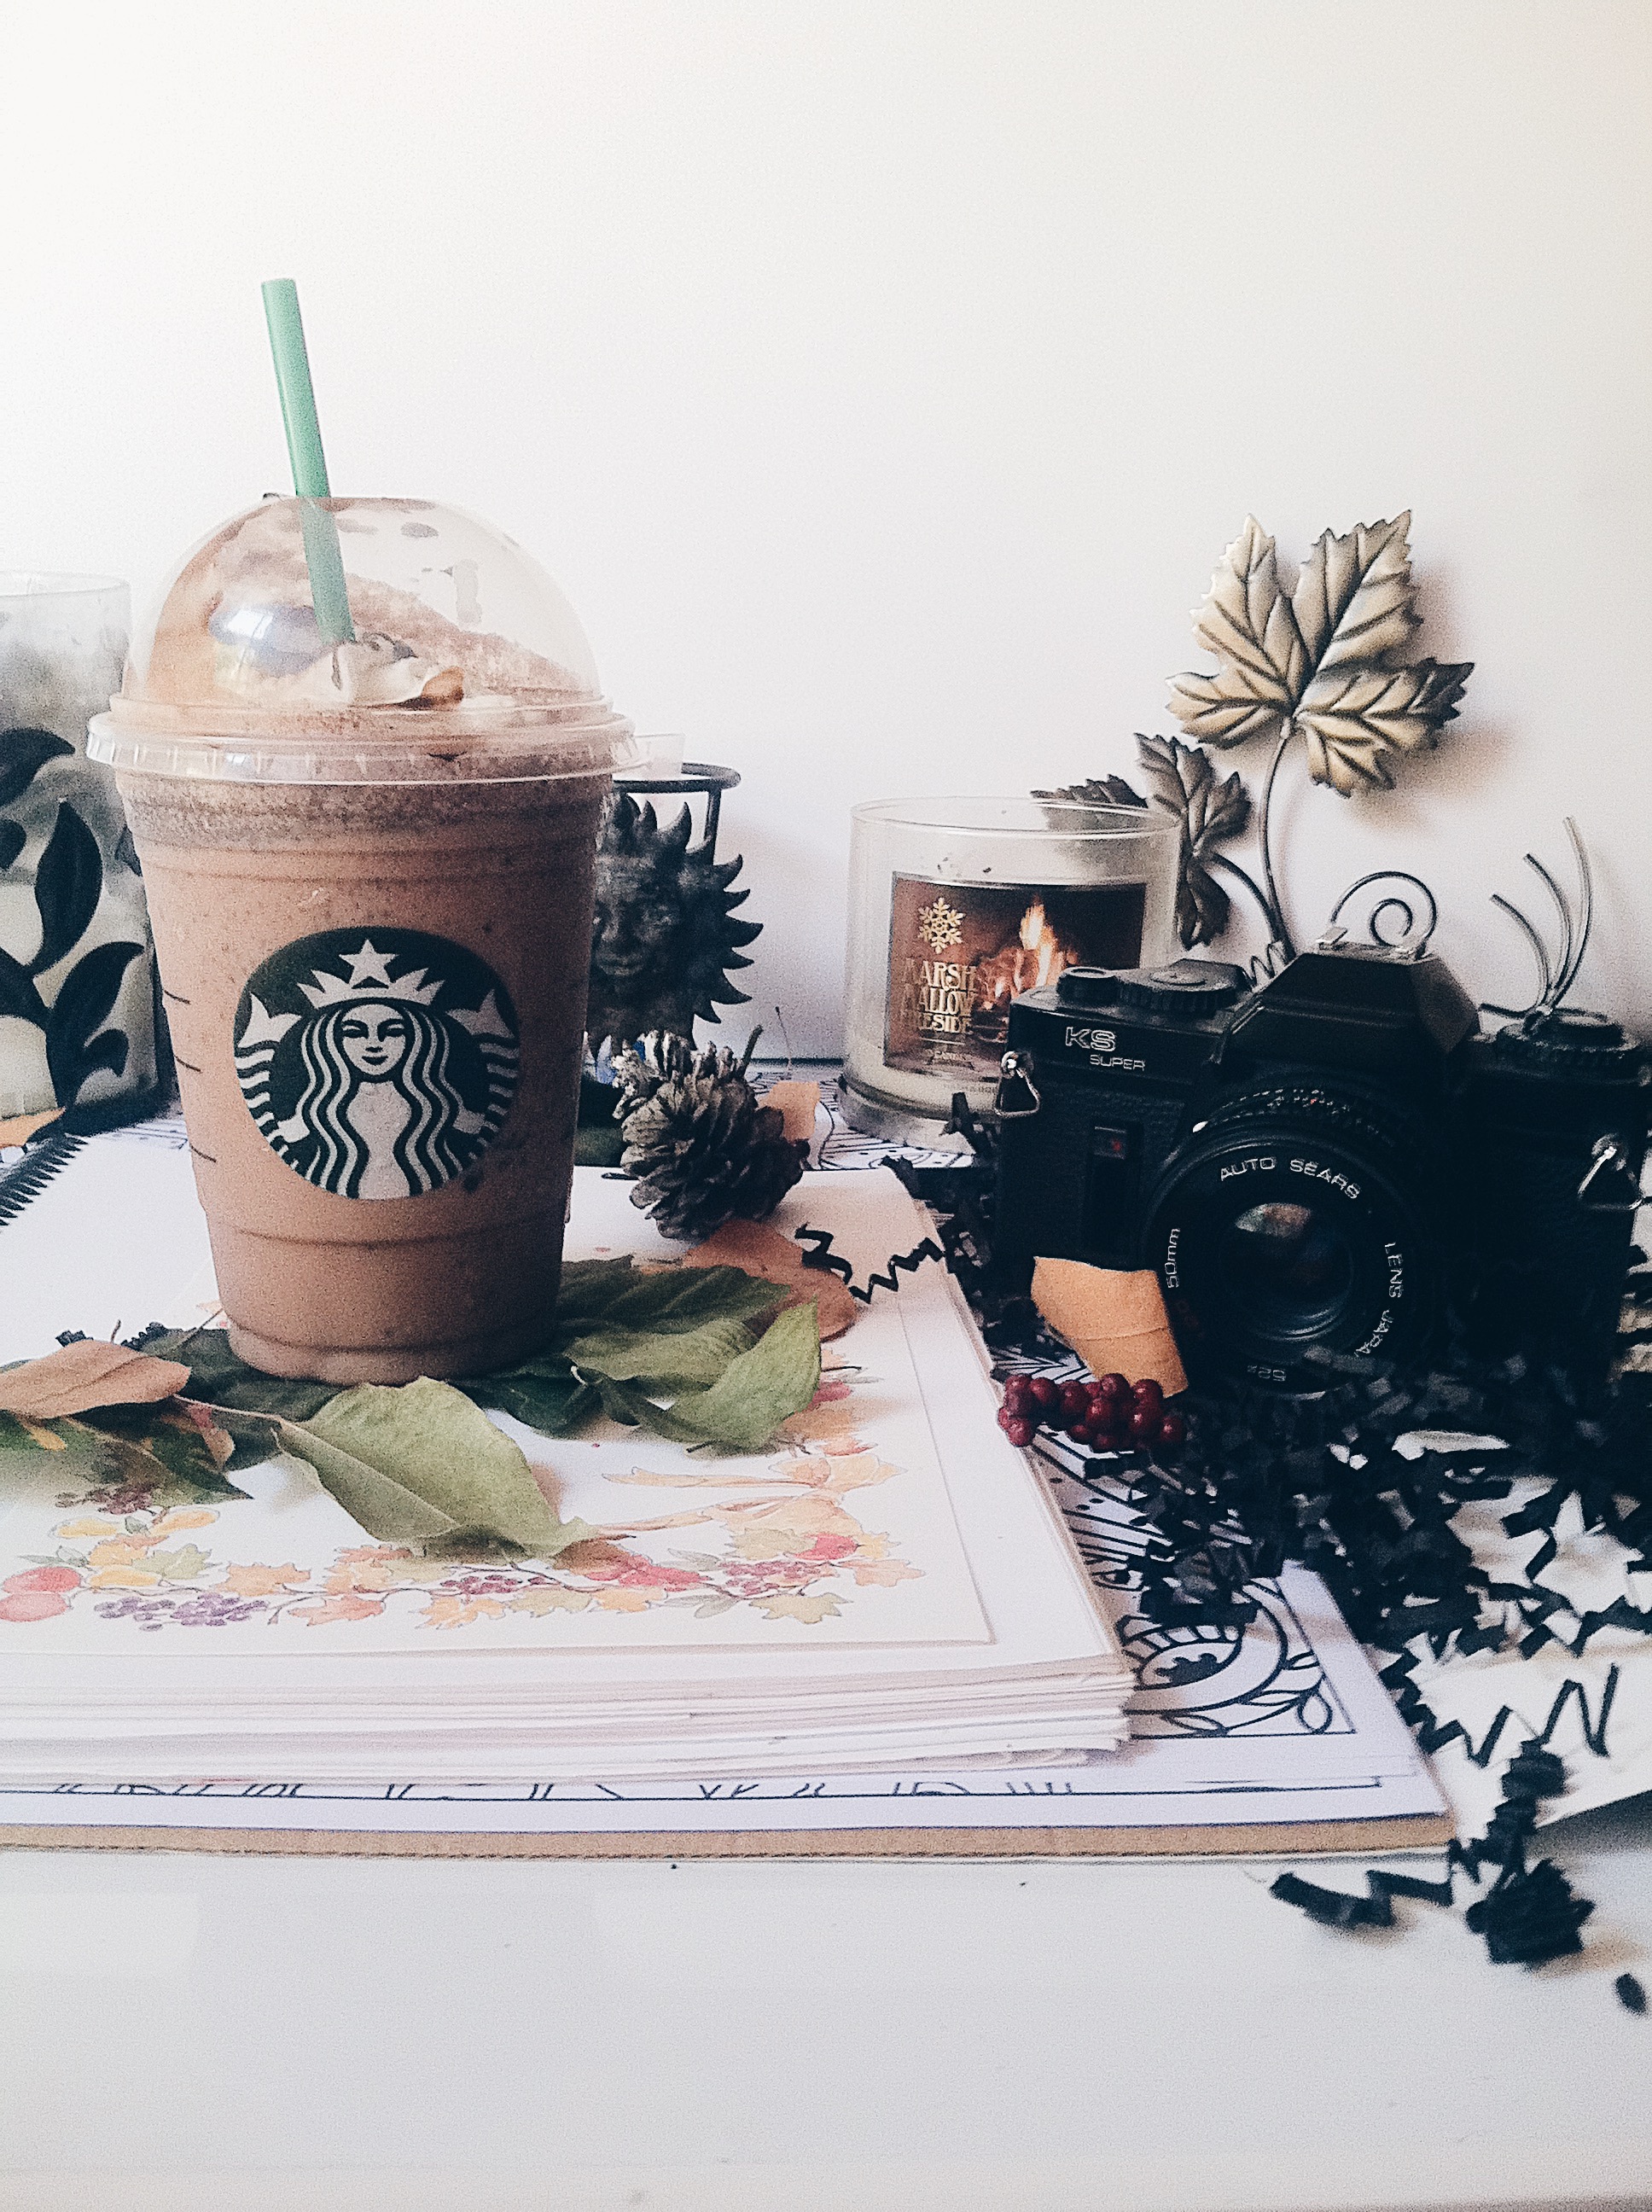 Starbucks aesthetic, double chocolate chip frappuccino